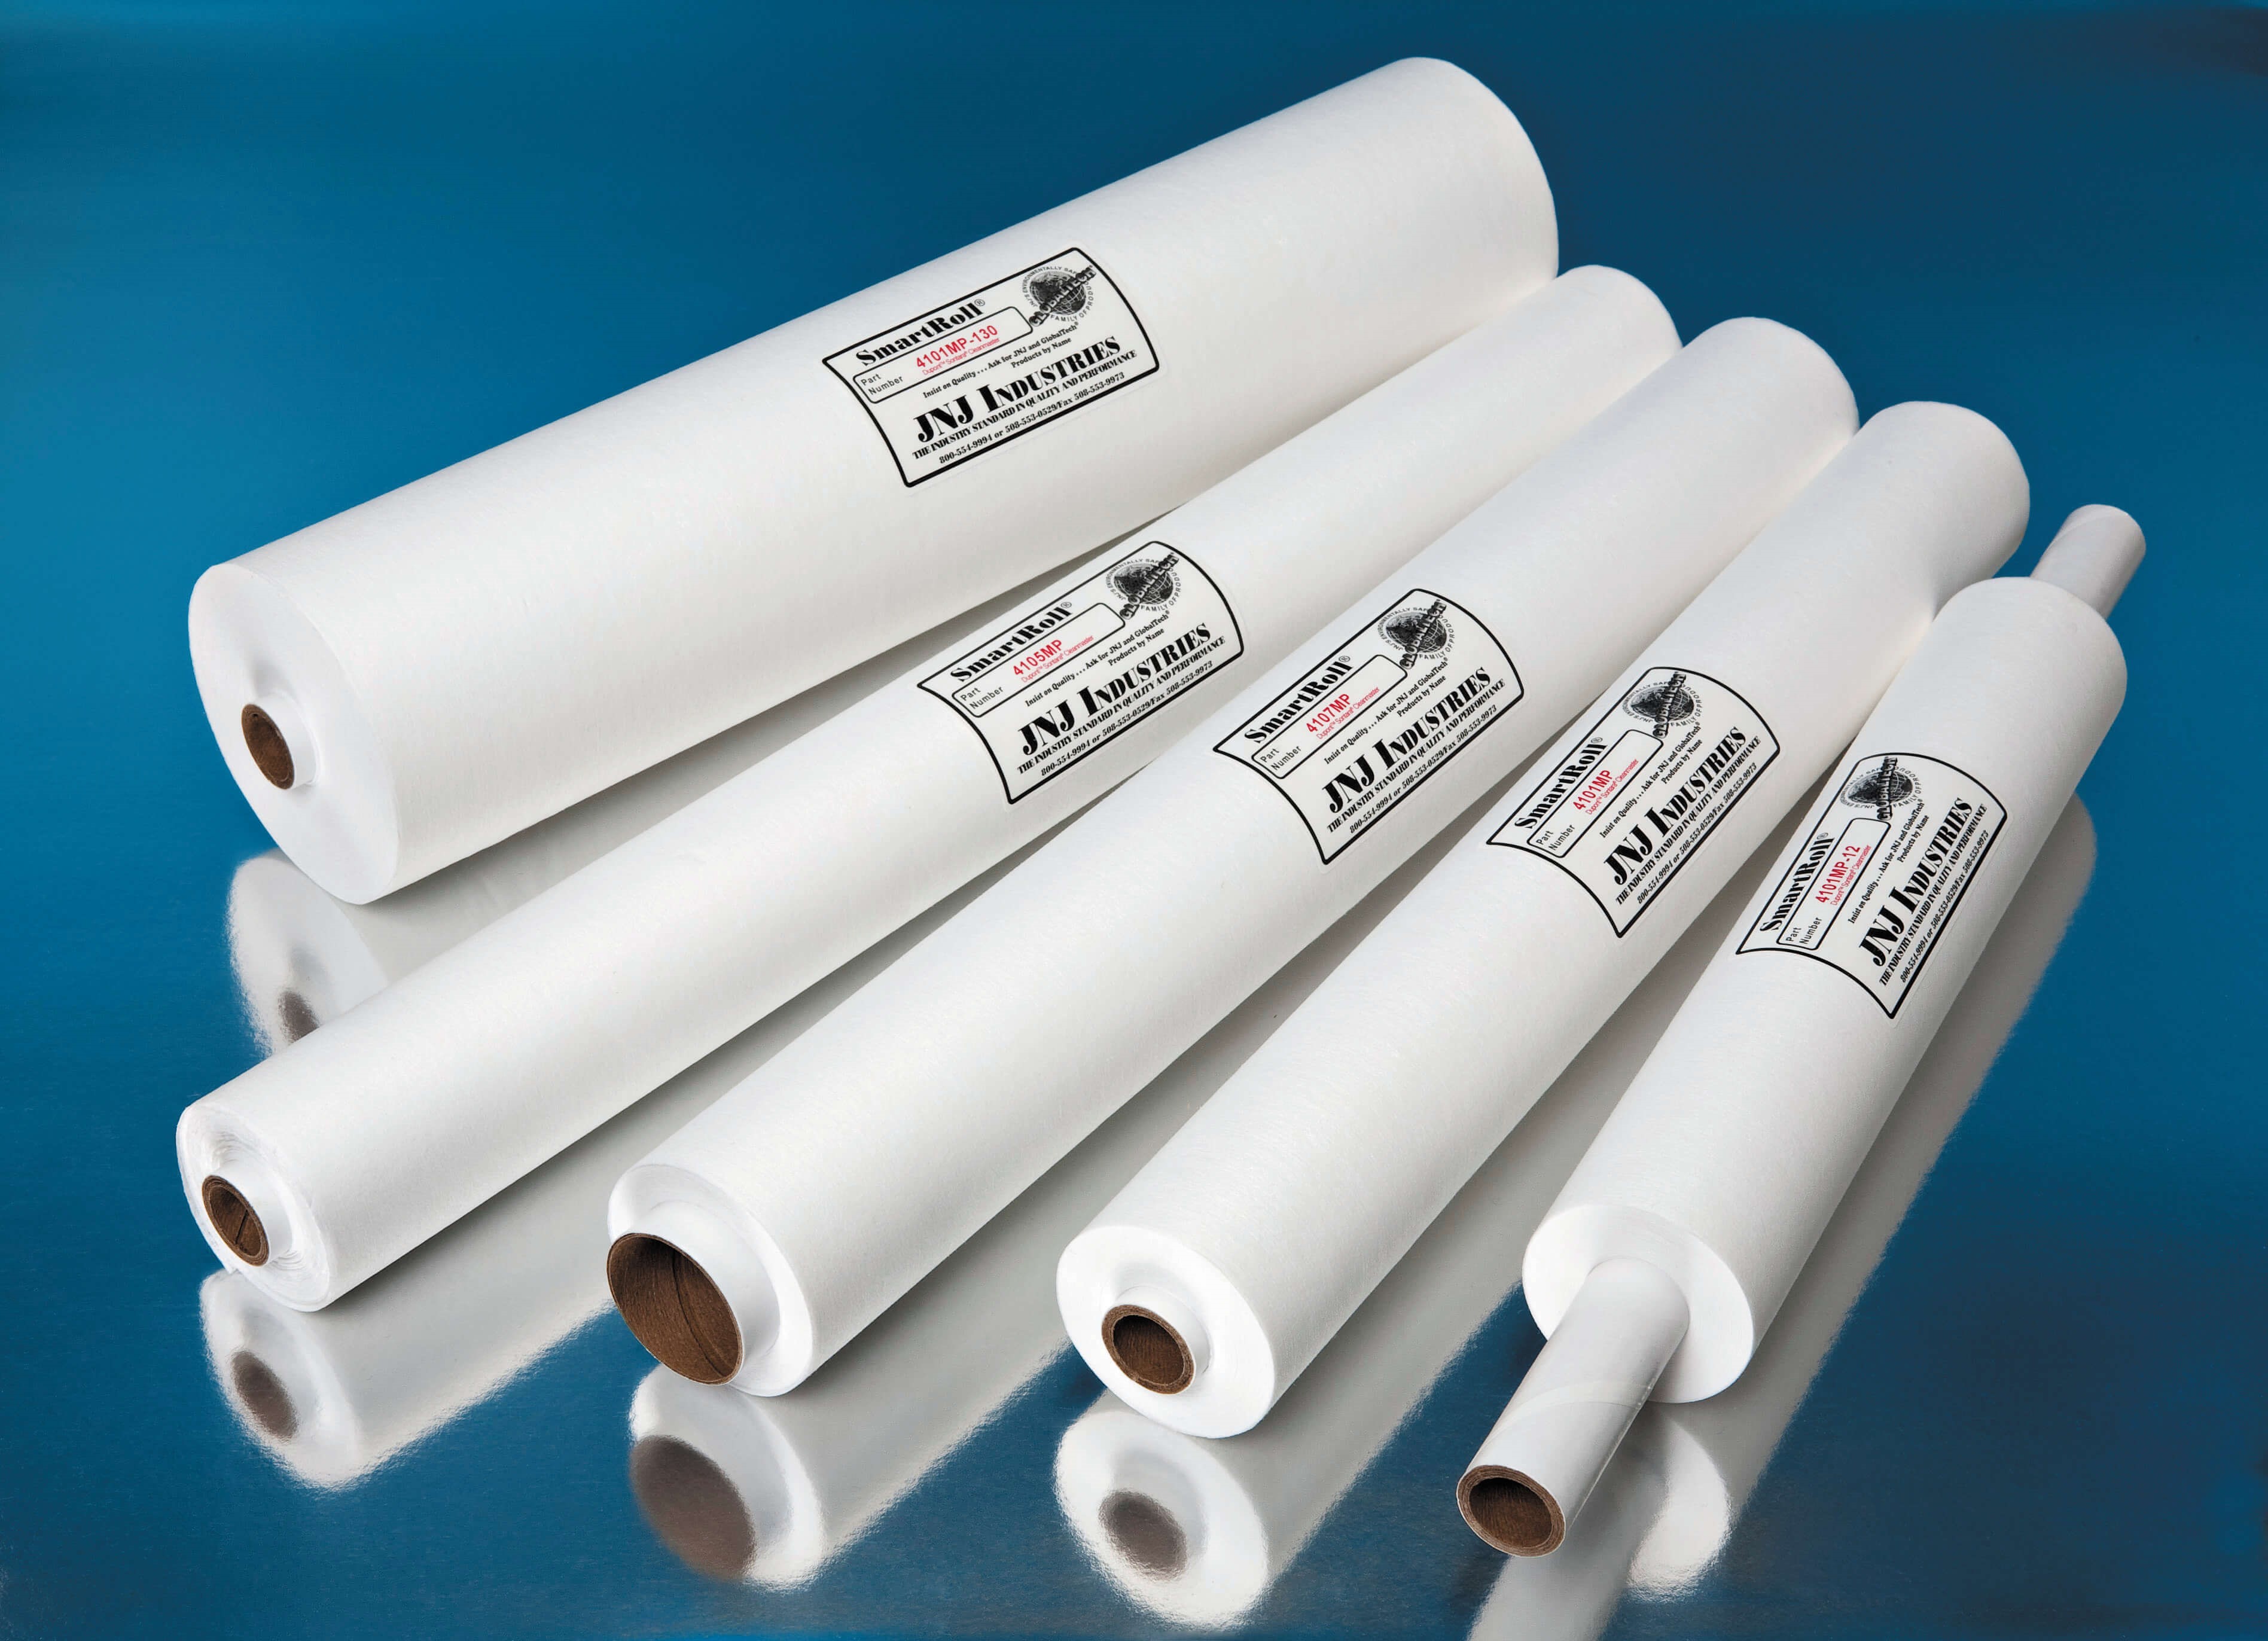 22" wide roll, fits most Momentum and Accela printers, 3/4" ID x 22" long core, 21.5" wide x 39 feet of paper, 15 rolls per case